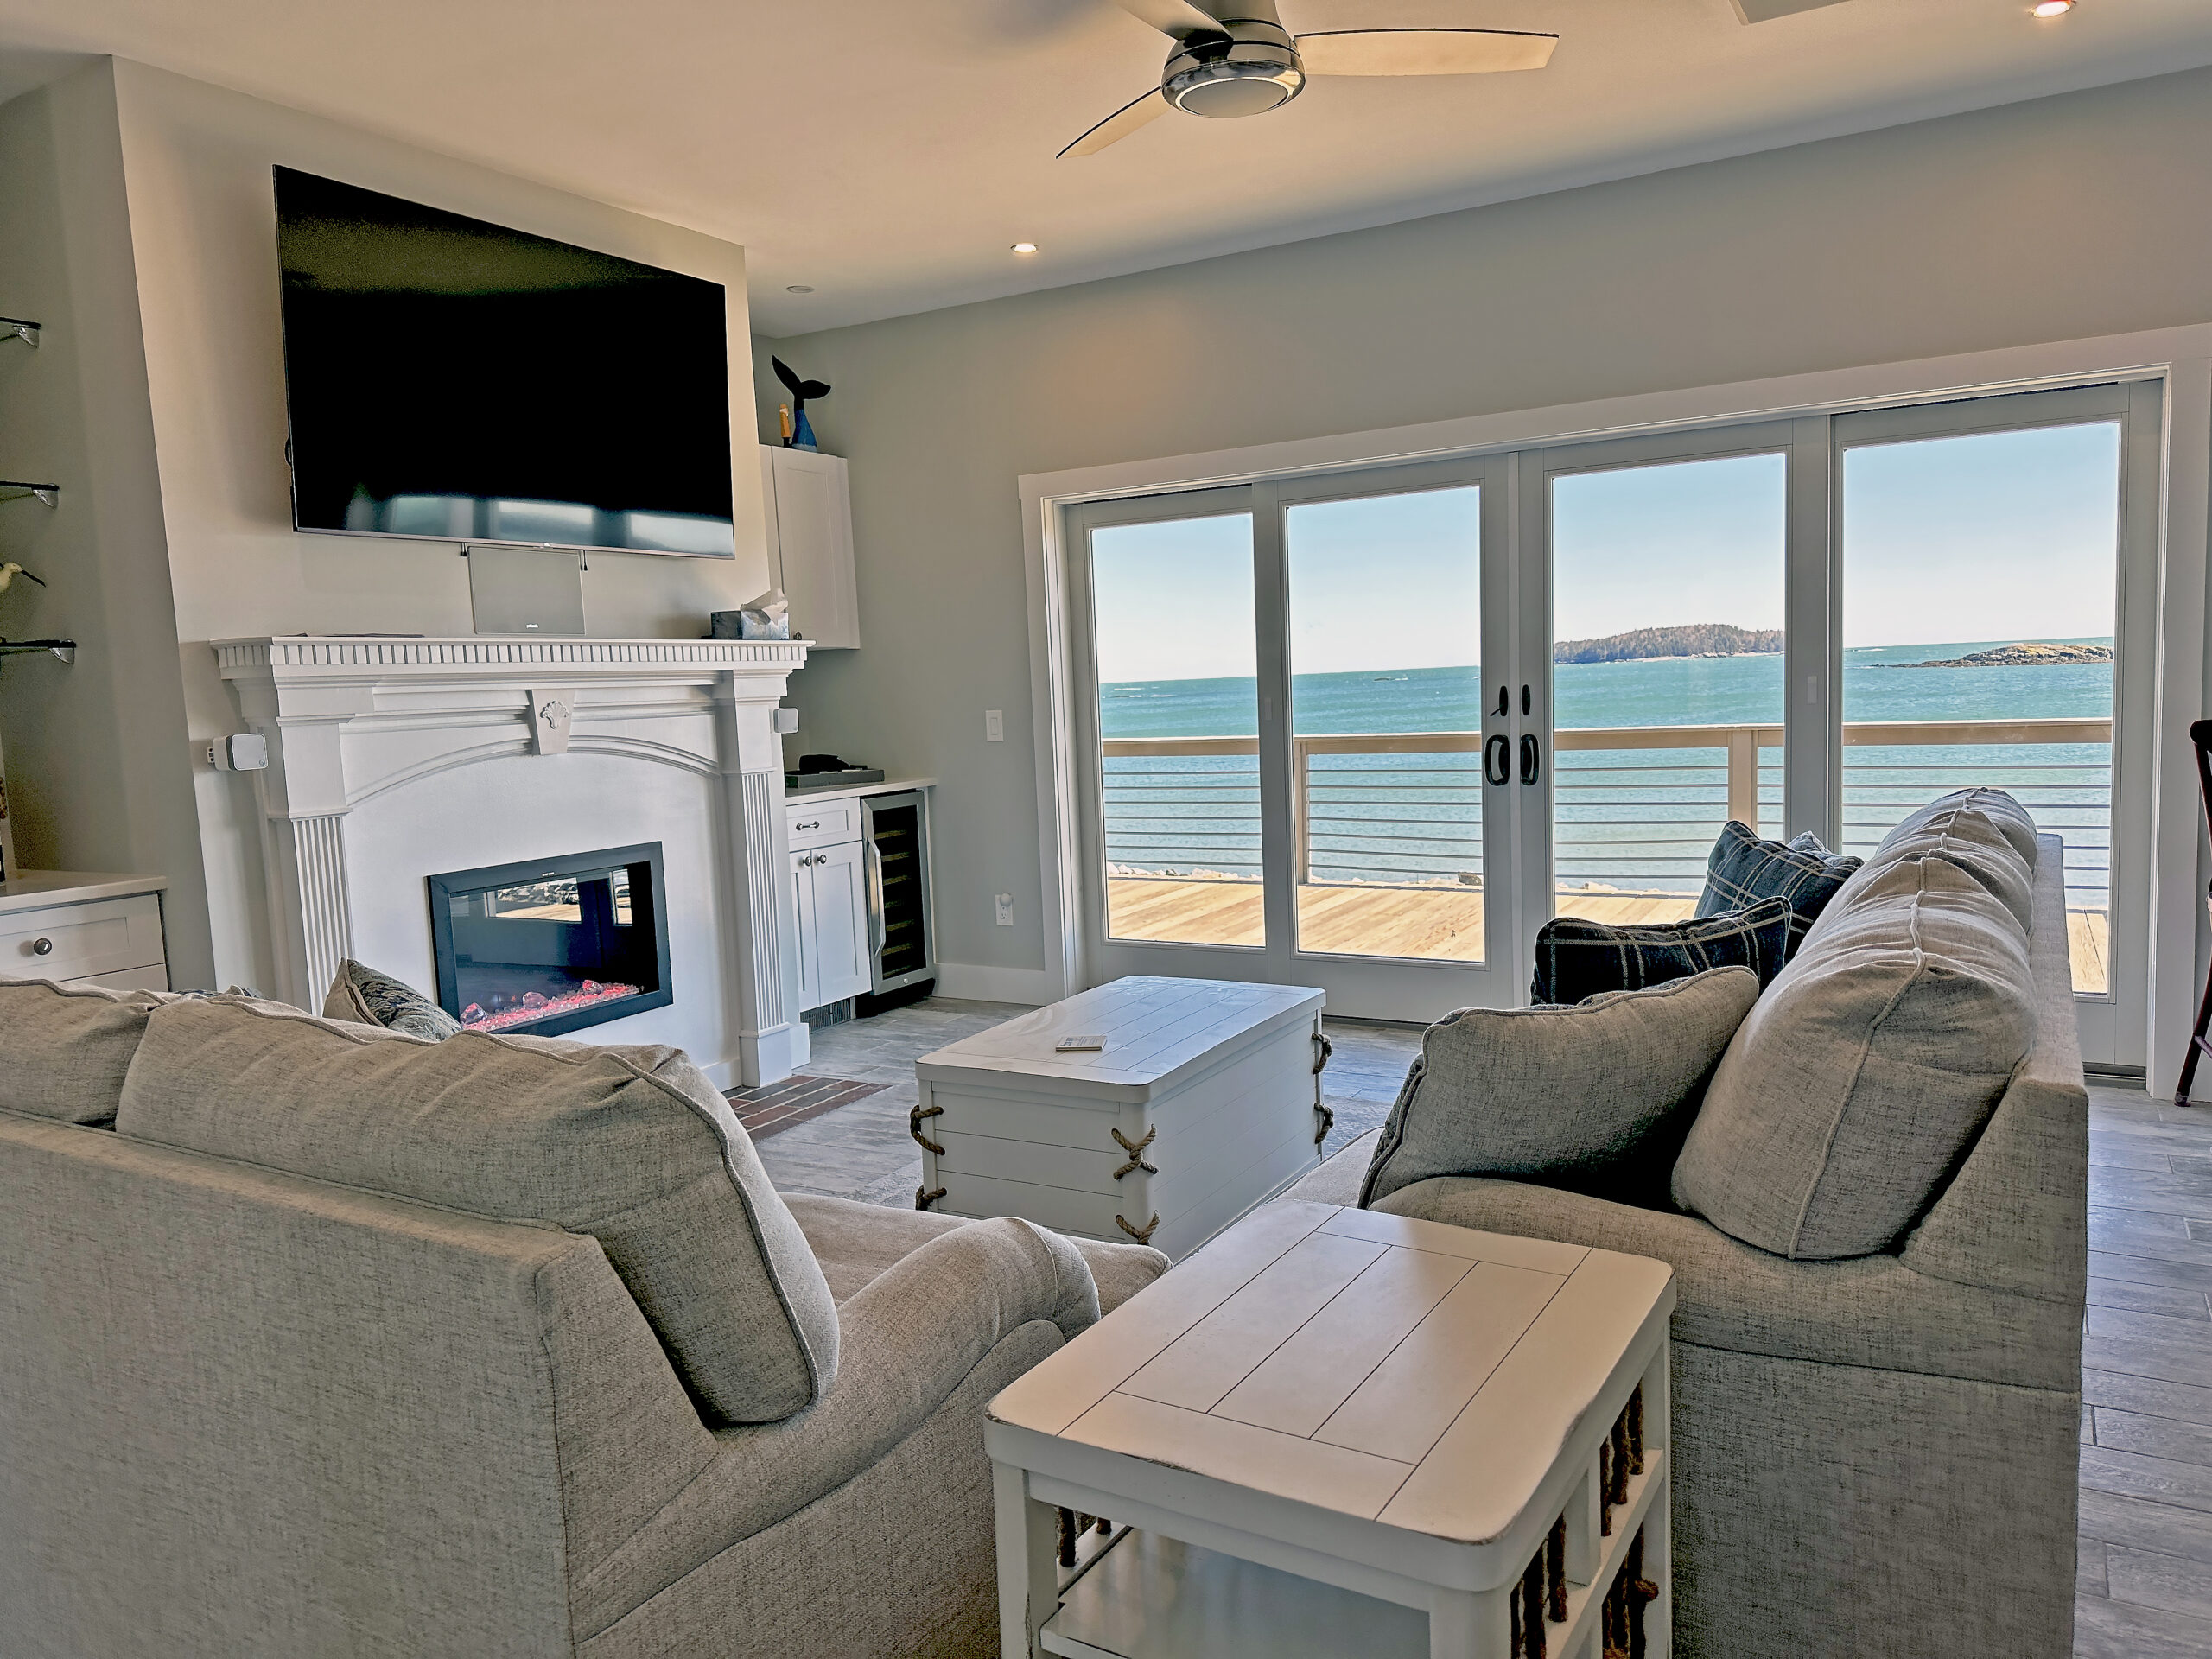 Electric Fireplace and ocean views - Sea Duck Cottage Maine